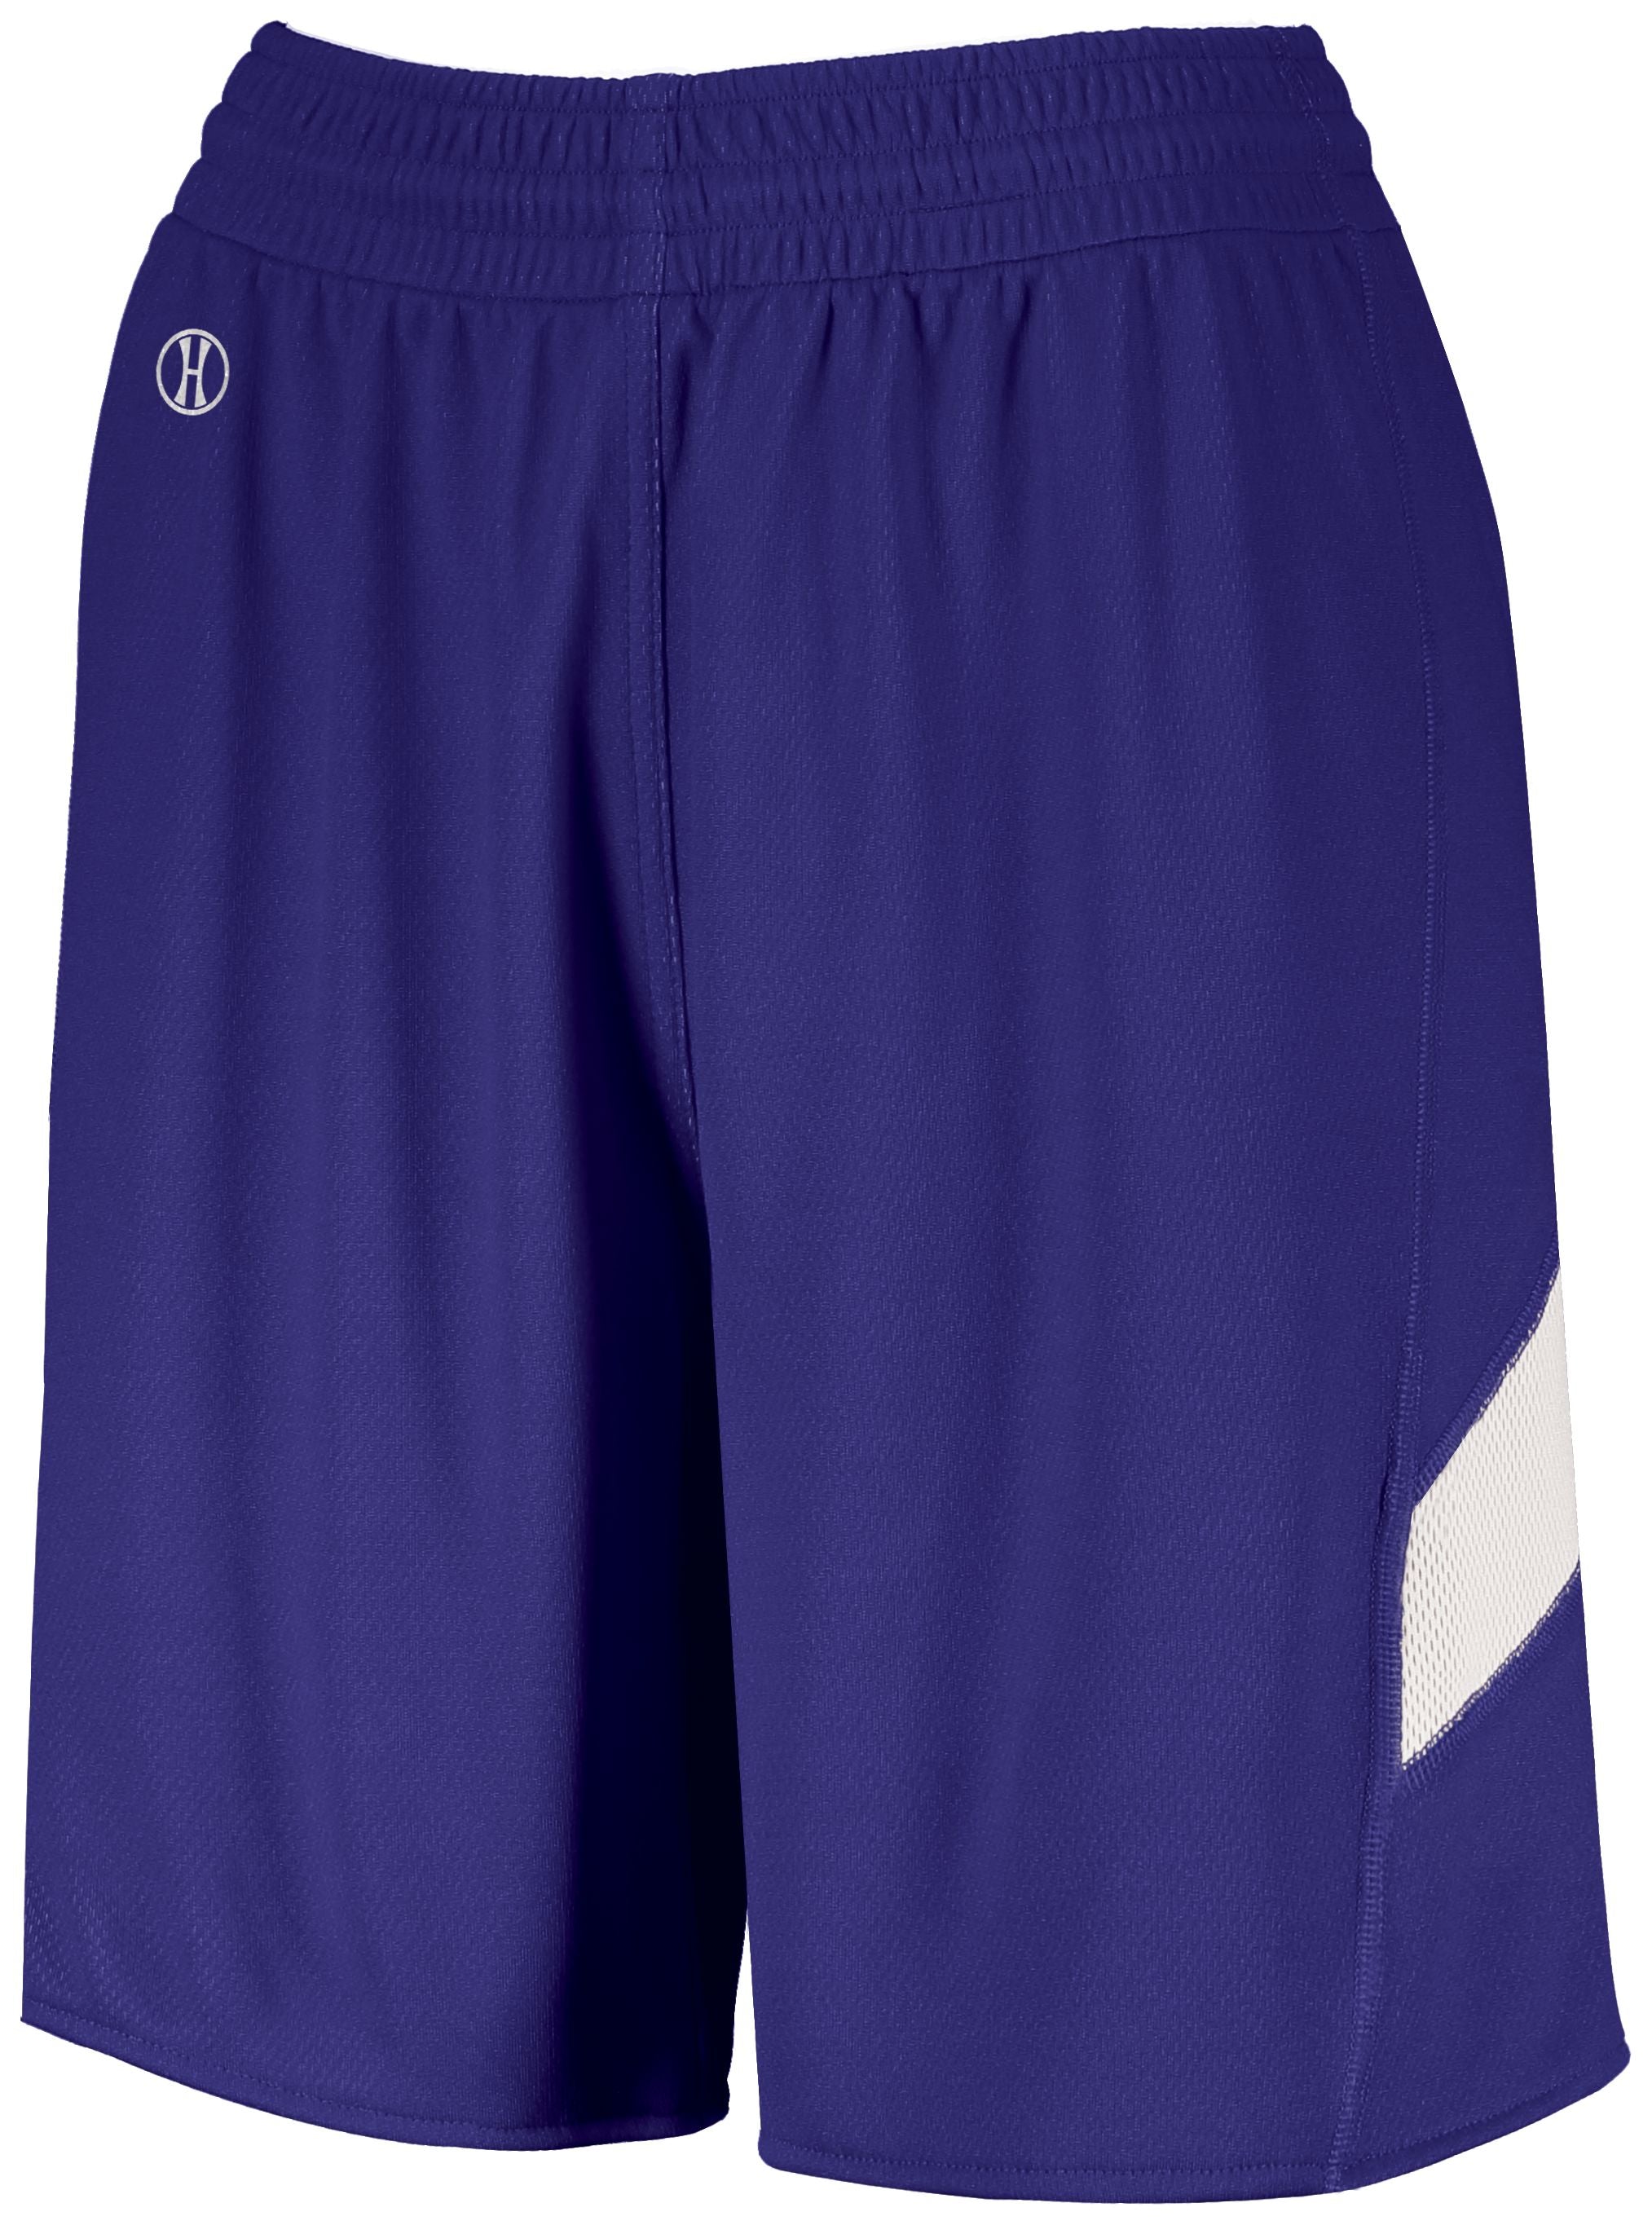 Holloway Ladies Dual-Side Single Ply Shorts in Purple/White  -Part of the Ladies, Ladies-Shorts, Basketball, Holloway, All-Sports, All-Sports-1 product lines at KanaleyCreations.com